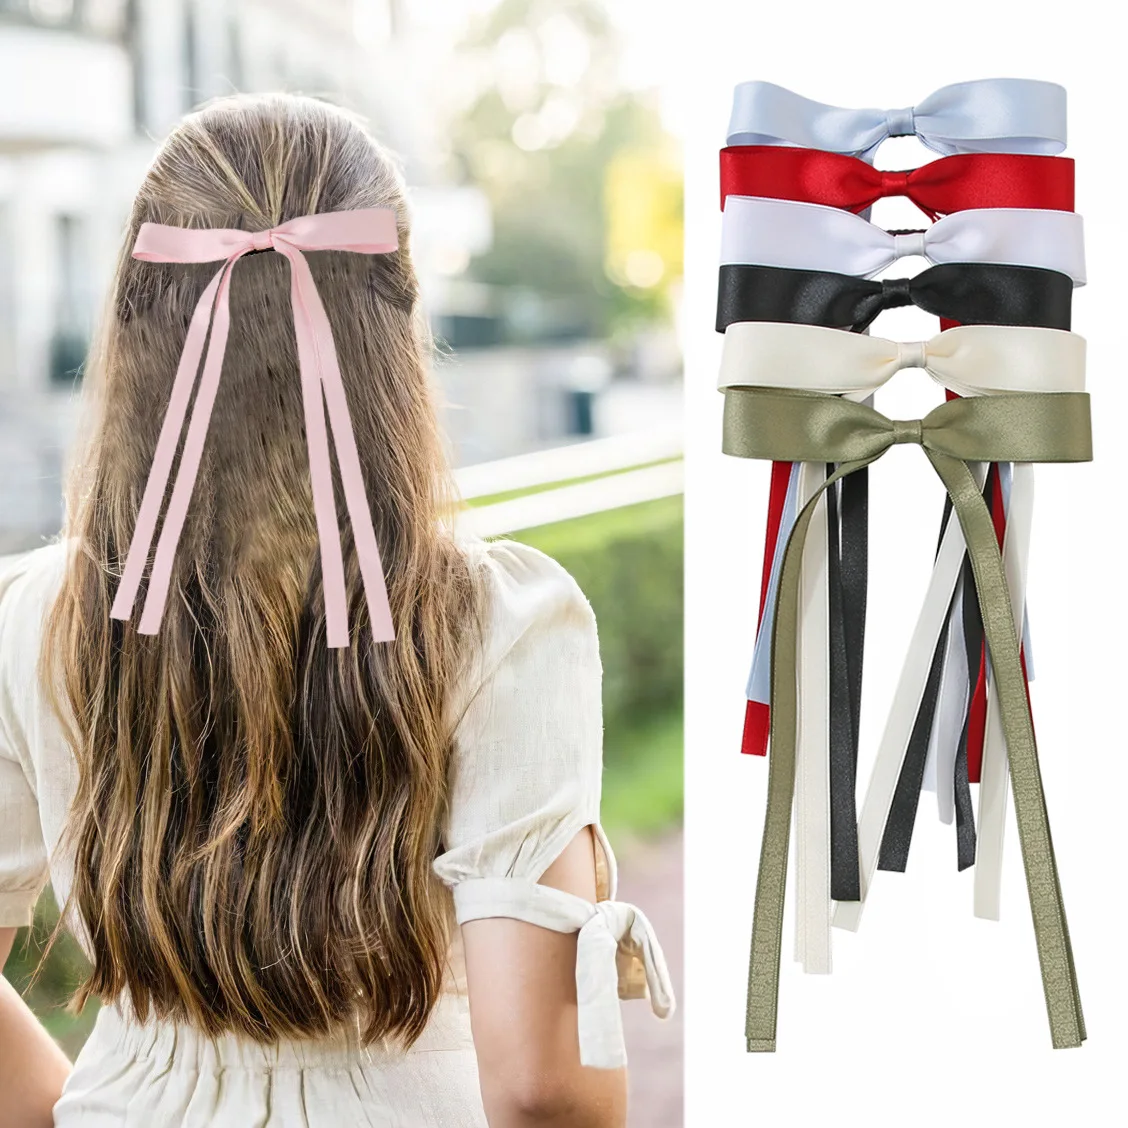 

Sweet Polyester Cotton Long Ribbon Bow Hair Clip For Women Girls Elegant Bowknot Hairpins Barrette Hair Accessories Gifts